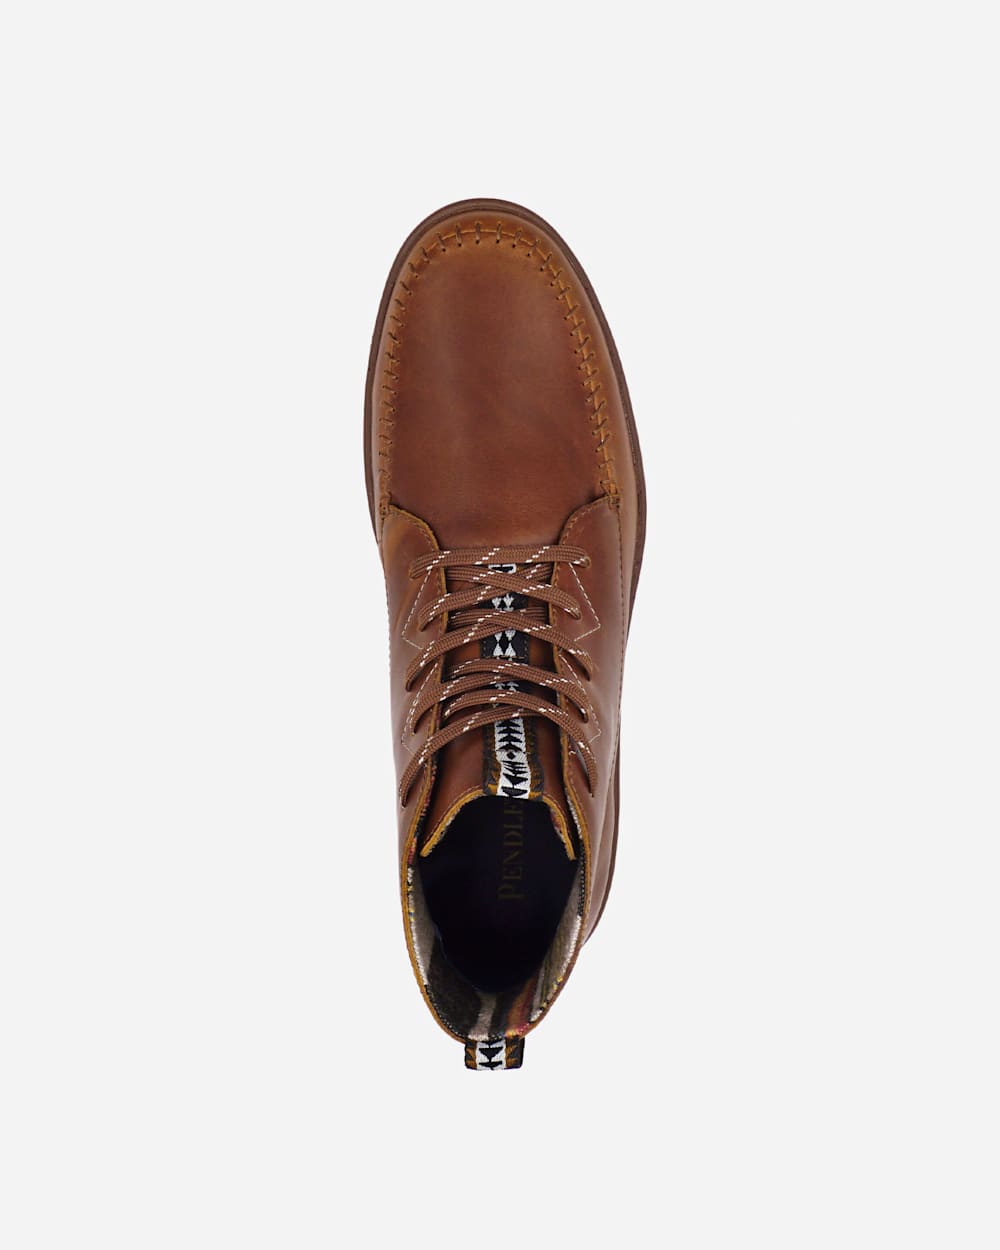 ALTERNATE VIEW OF MEN'S NUEVO POINT SNEAKER BOOTS IN CARAMEL CAFE image number 3